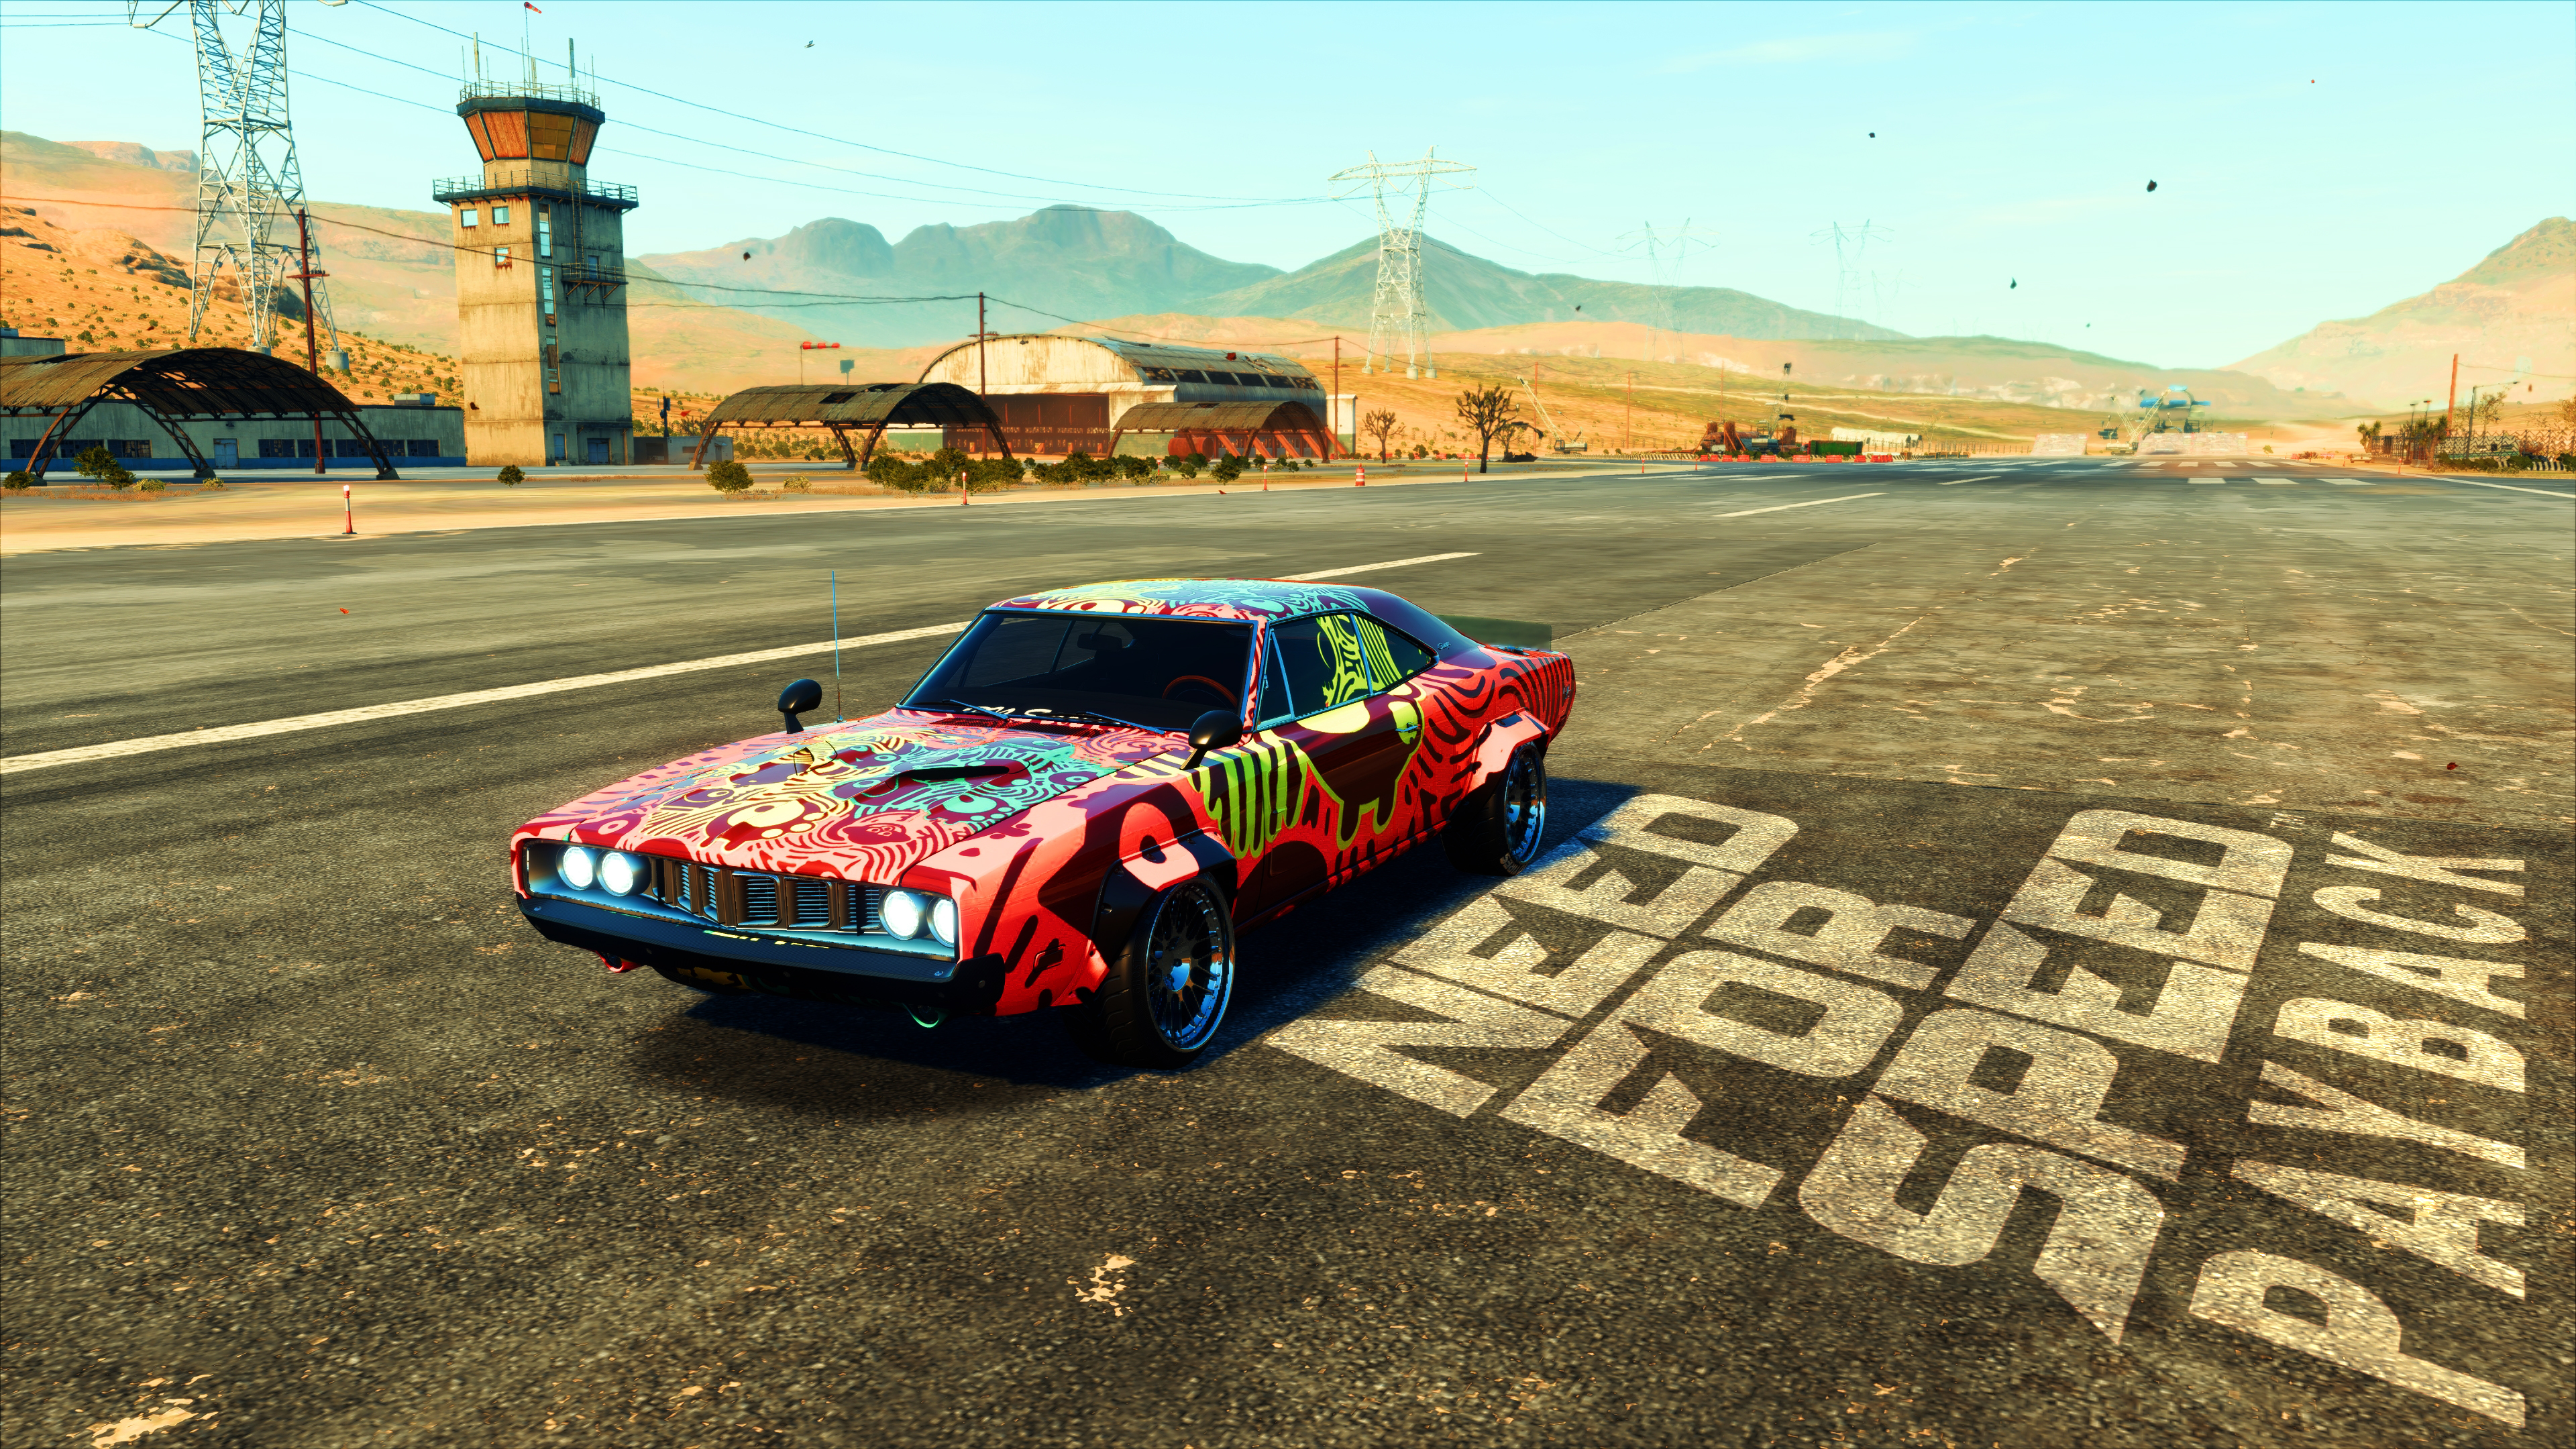 General 3840x2160 Need for Speed Payback video games car screen shot racing vehicle red cars